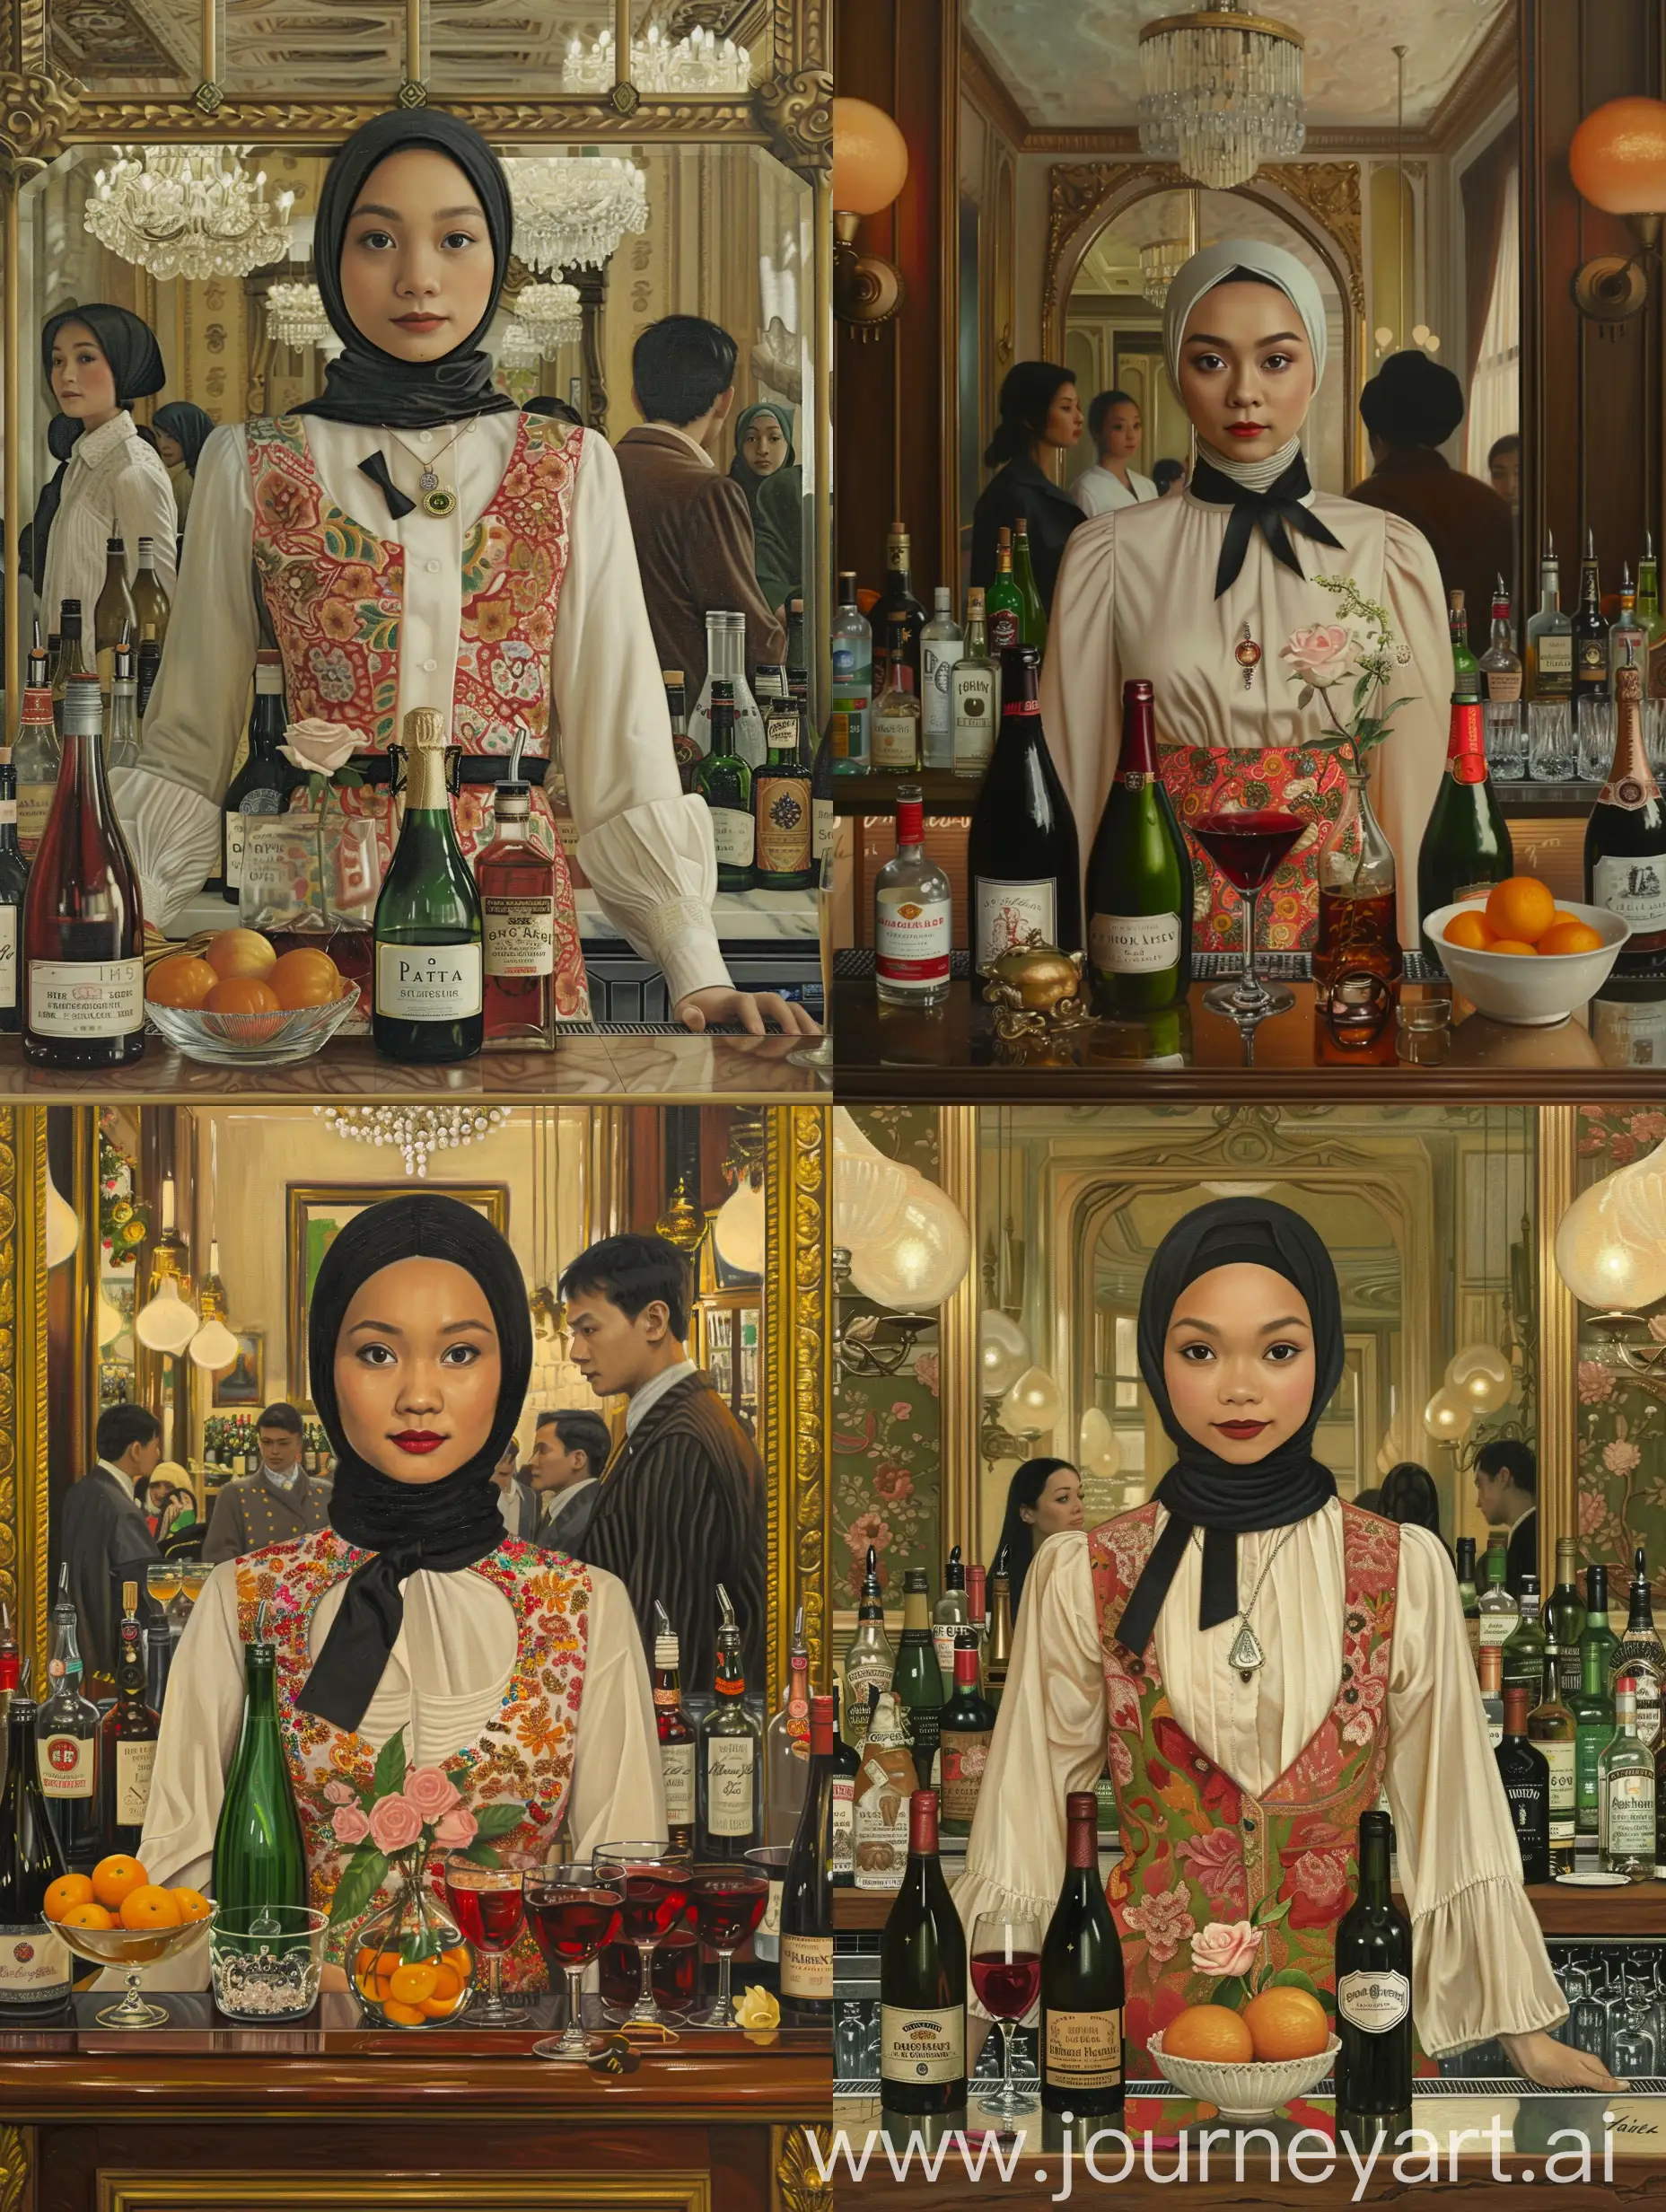 Indonesian-Hijab-Woman-Behind-Bar-Counter-Impressionist-Painting-with-Wine-Oranges-and-Roses